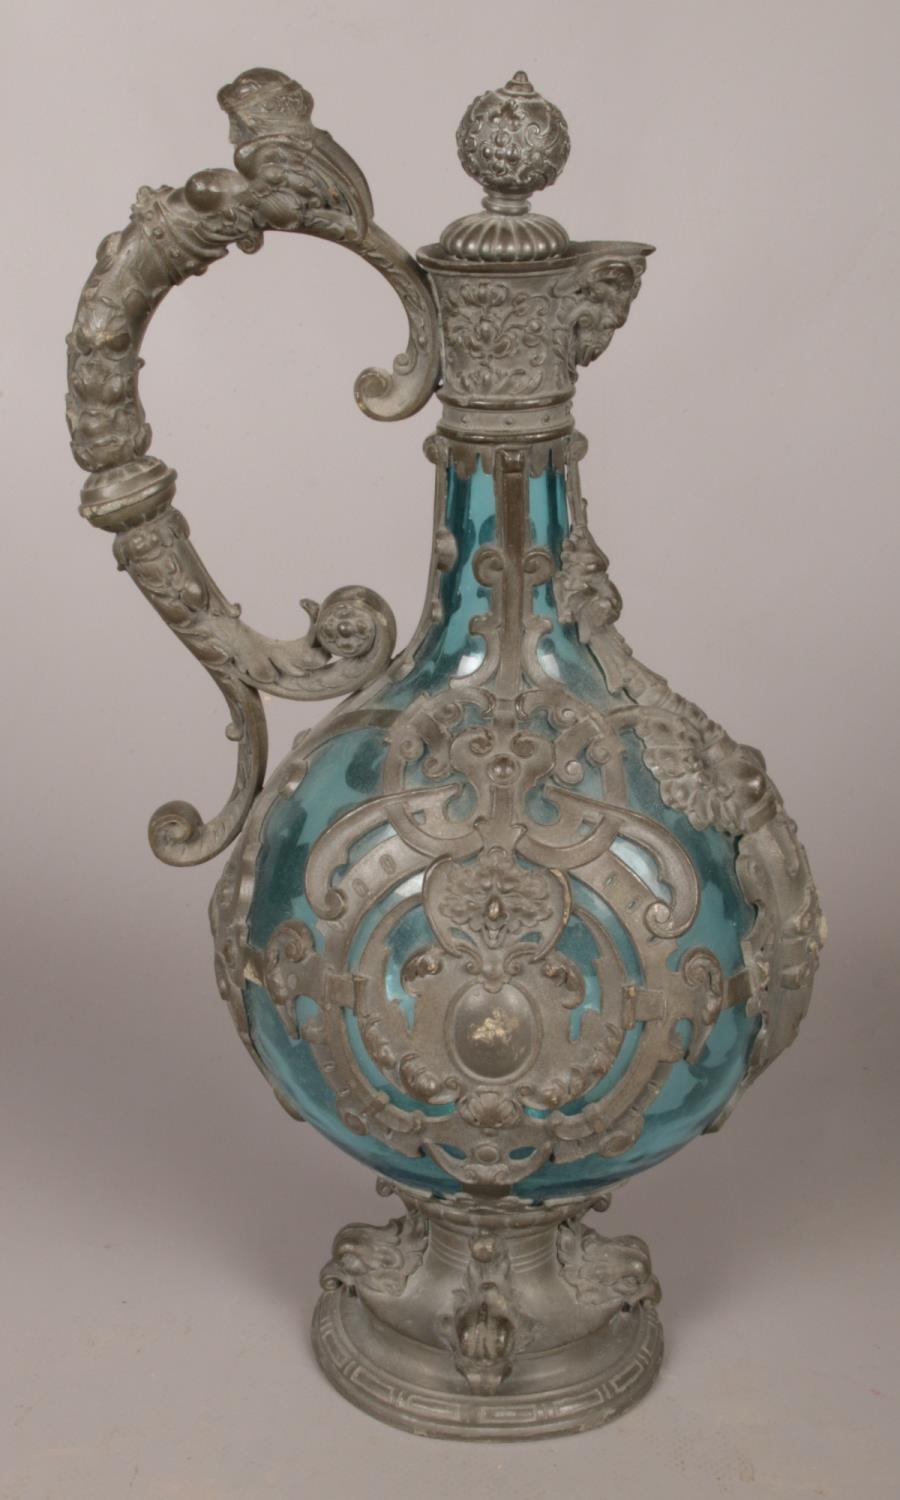 A 19th century blue glass ewer with pewter mounts and mask decorations. 29cm.